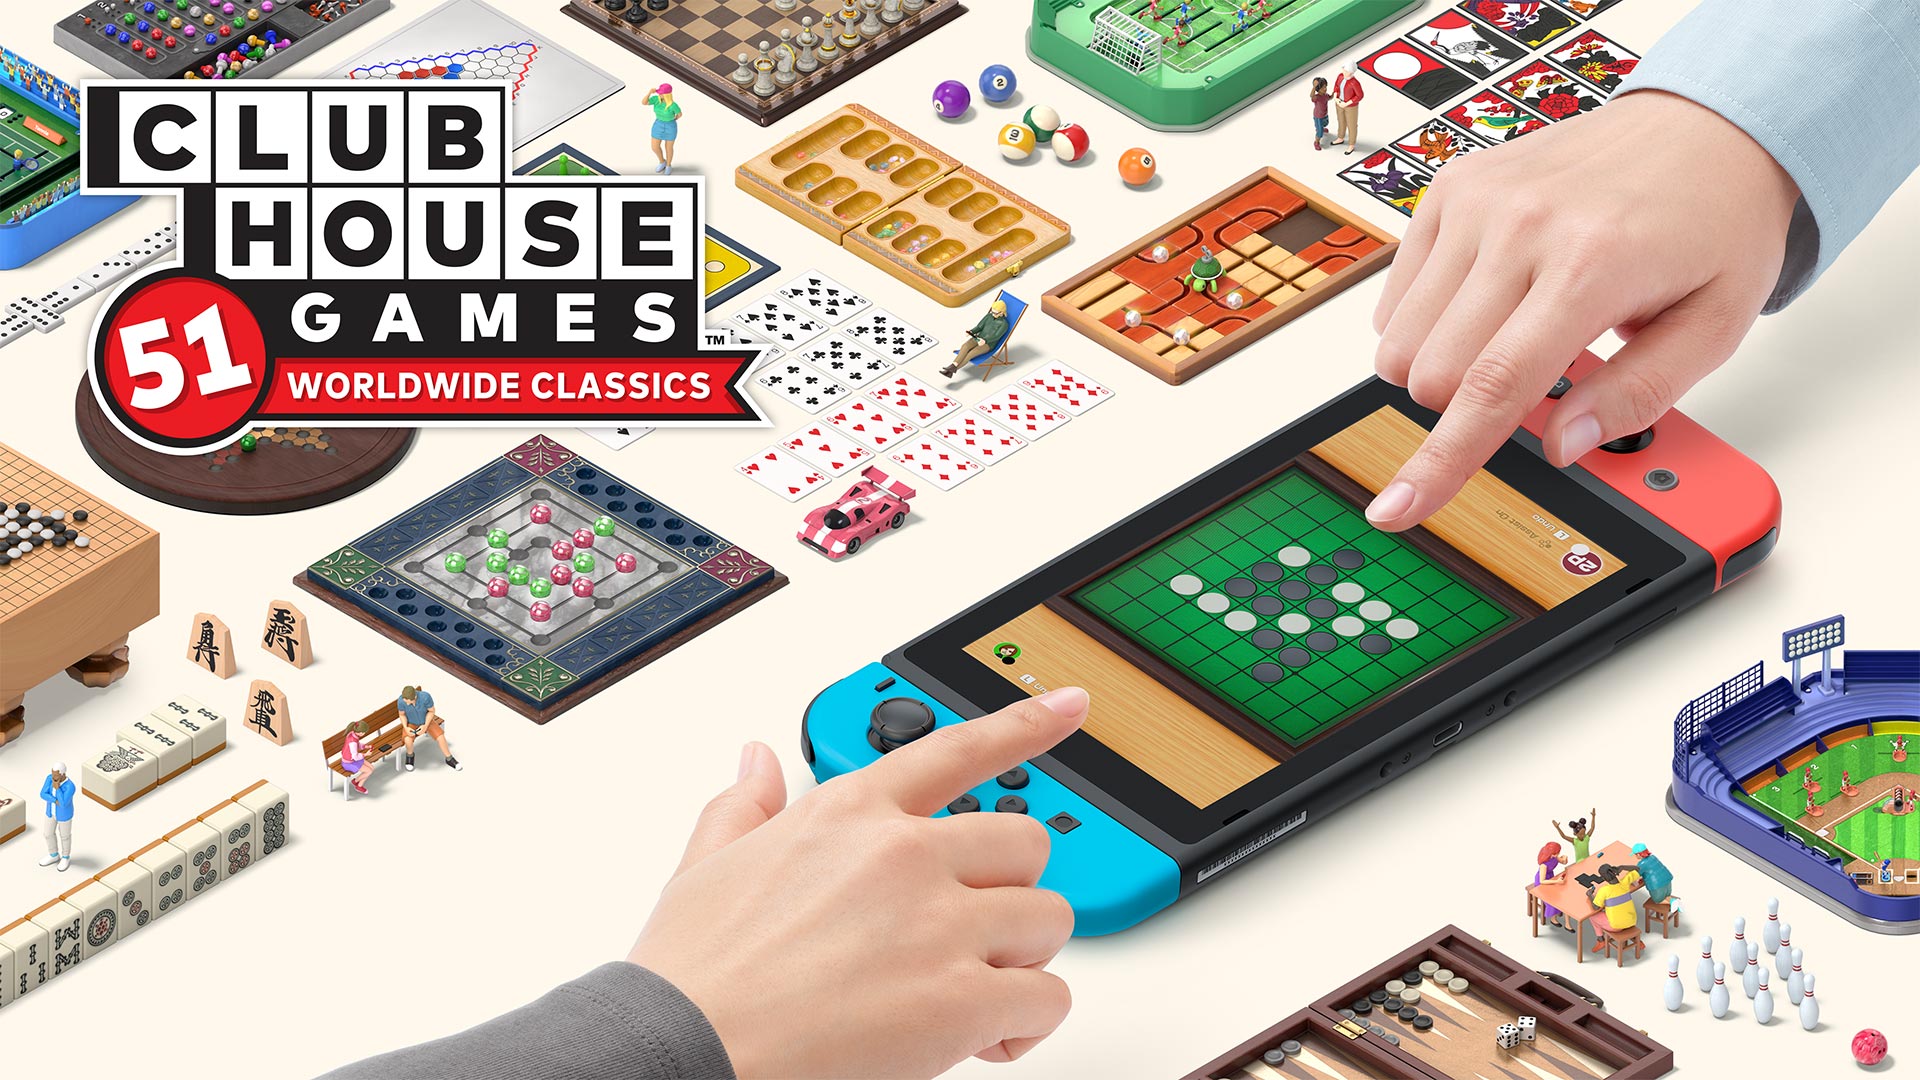 Clubhouse Games: 51 Worldwide Classics Review